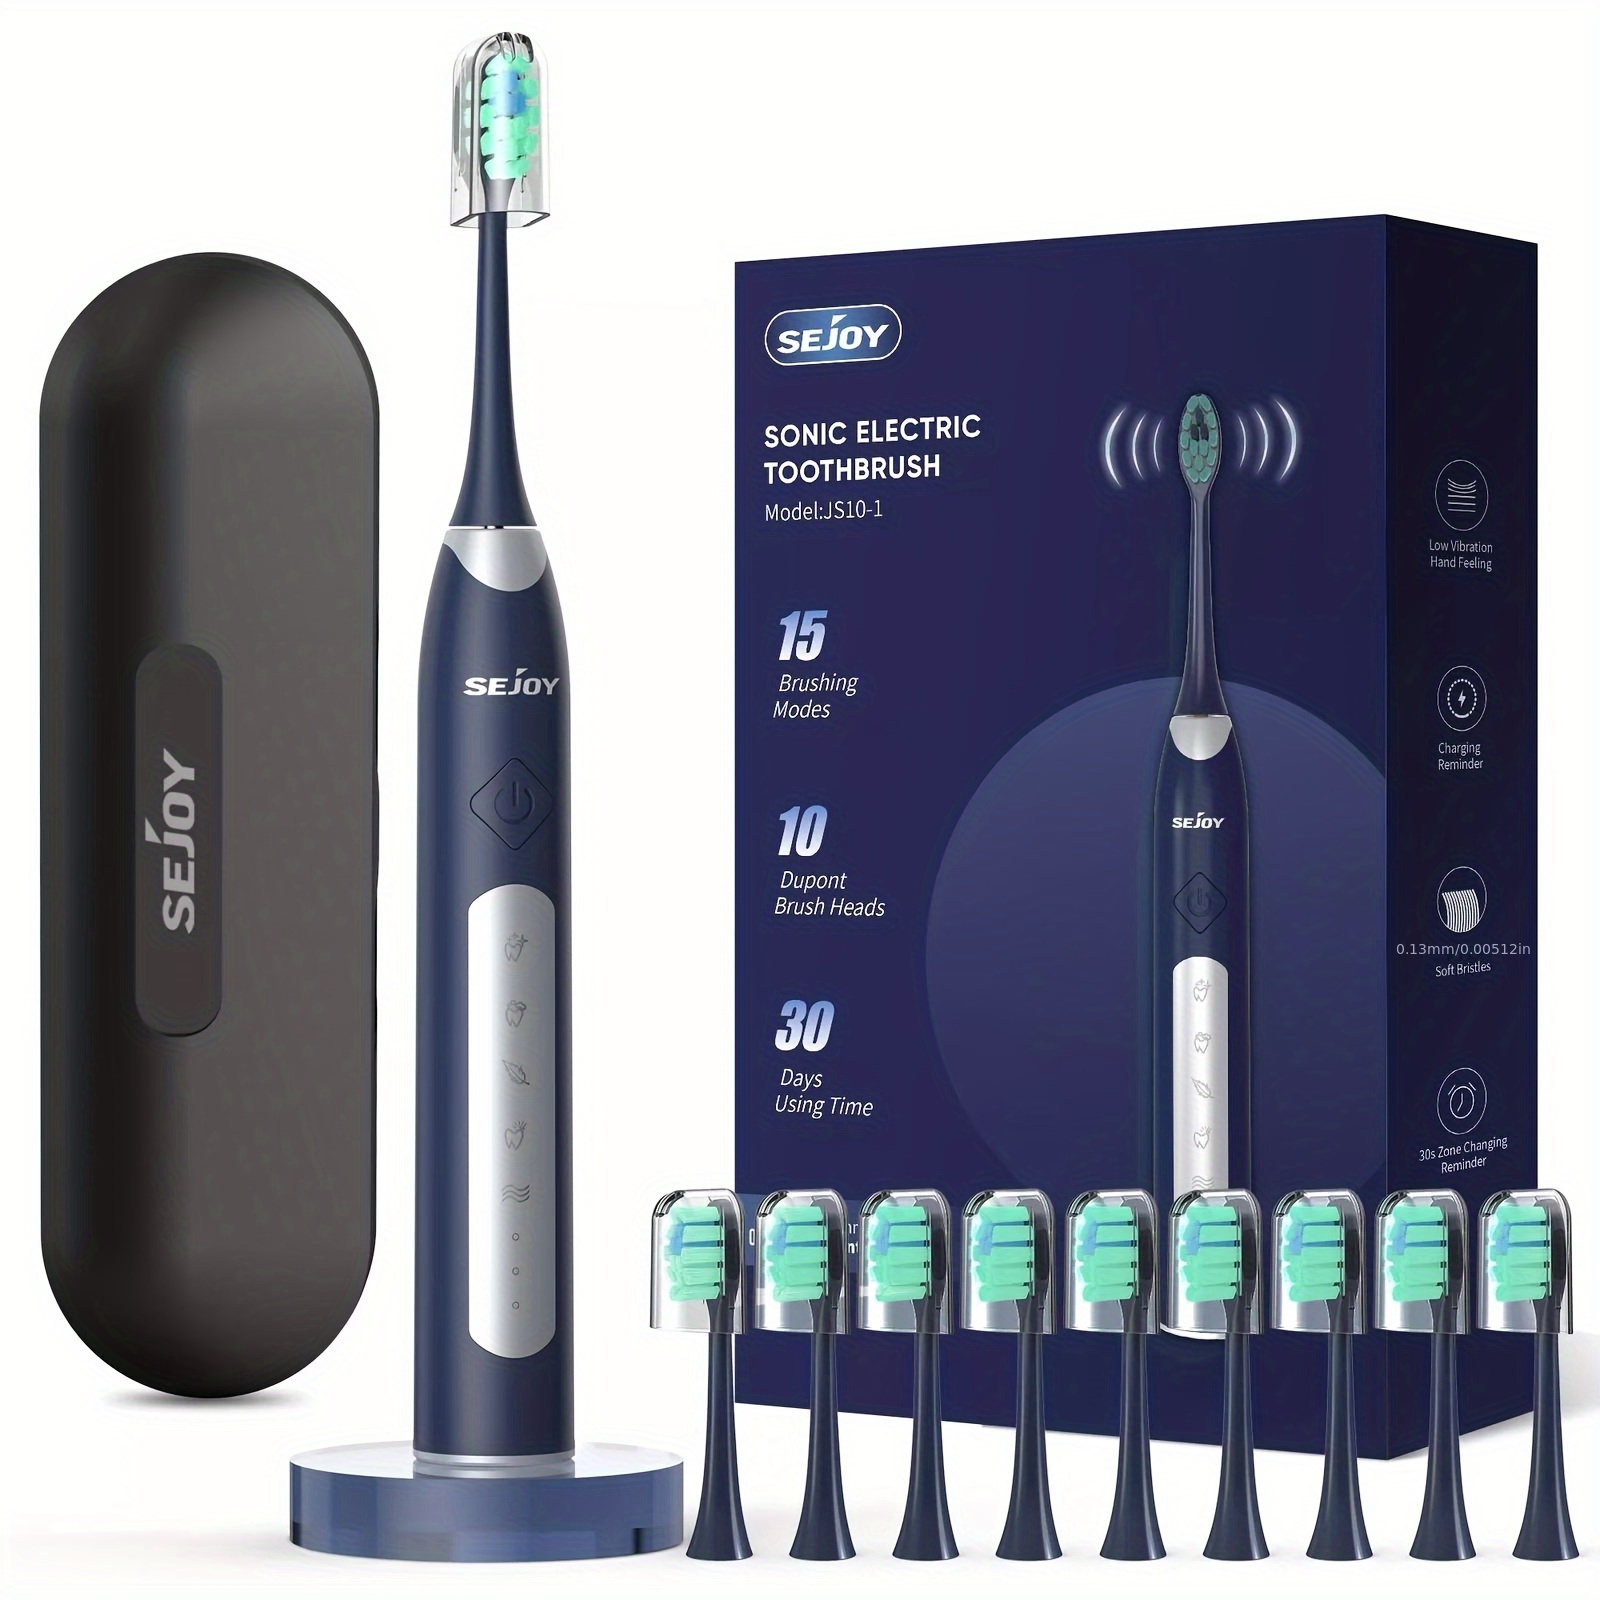 

Adult Electric Toothbrush - Rechargeable Electric Toothbrush With Travel Case, 10 Brush Heads 5 Modes, Quick Charge 60 Days Use Travel Case